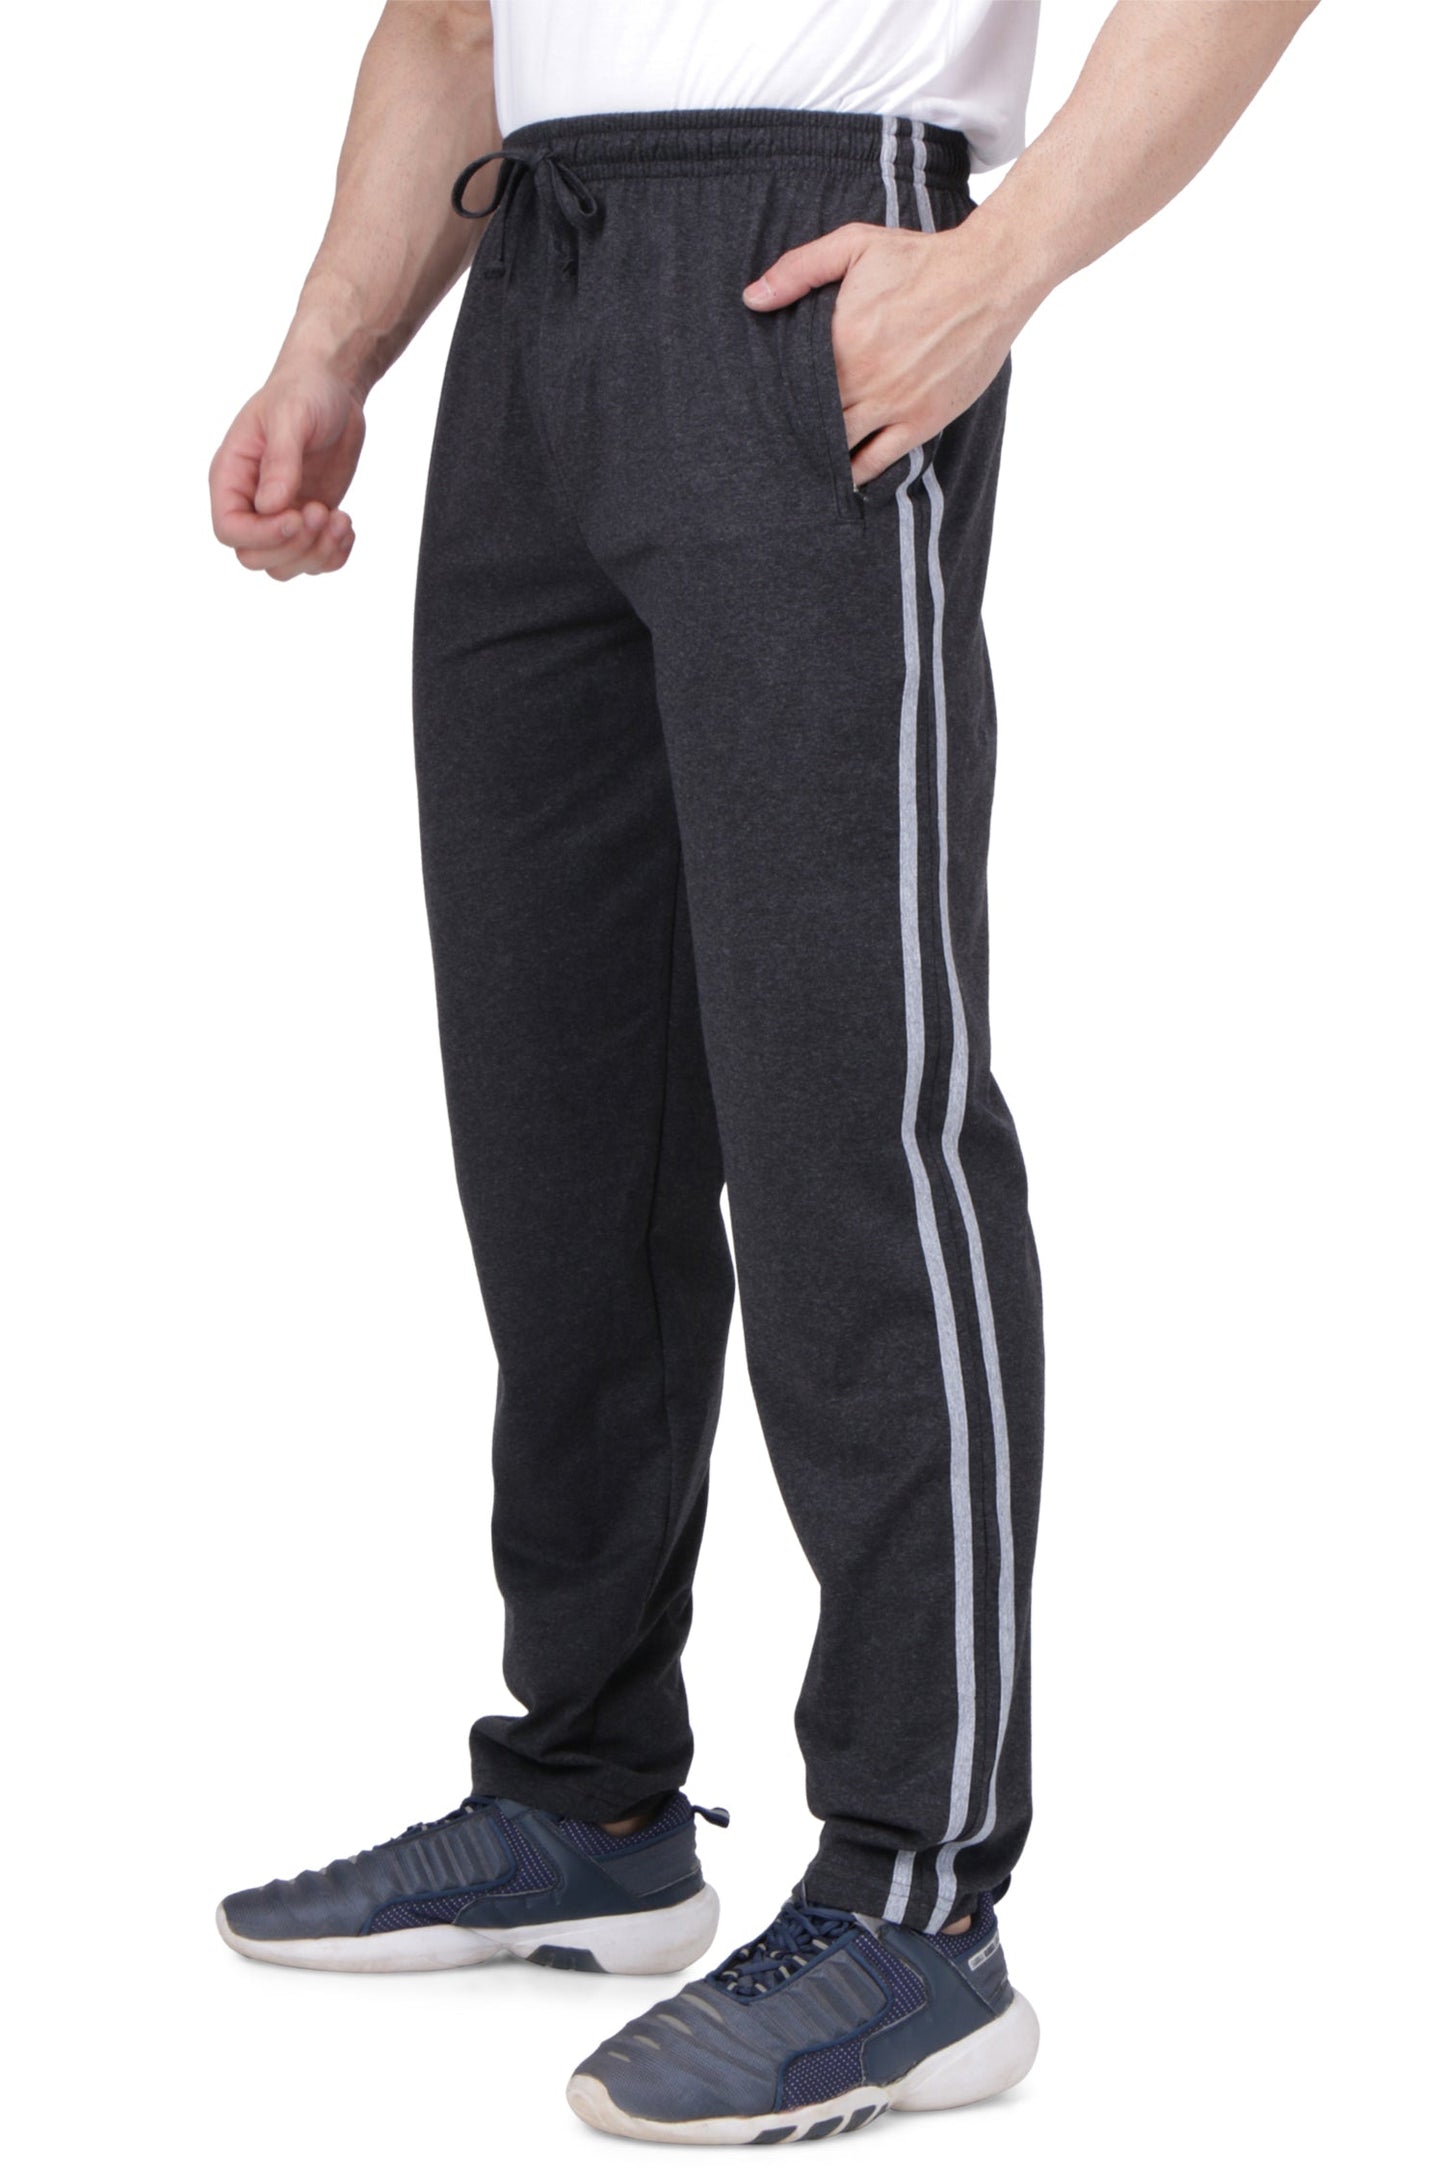 NEO GARMENTS Men's Cotton PATTI TRACK PANTS | CHARCOAL | SIZES FROM M TO 5XL.